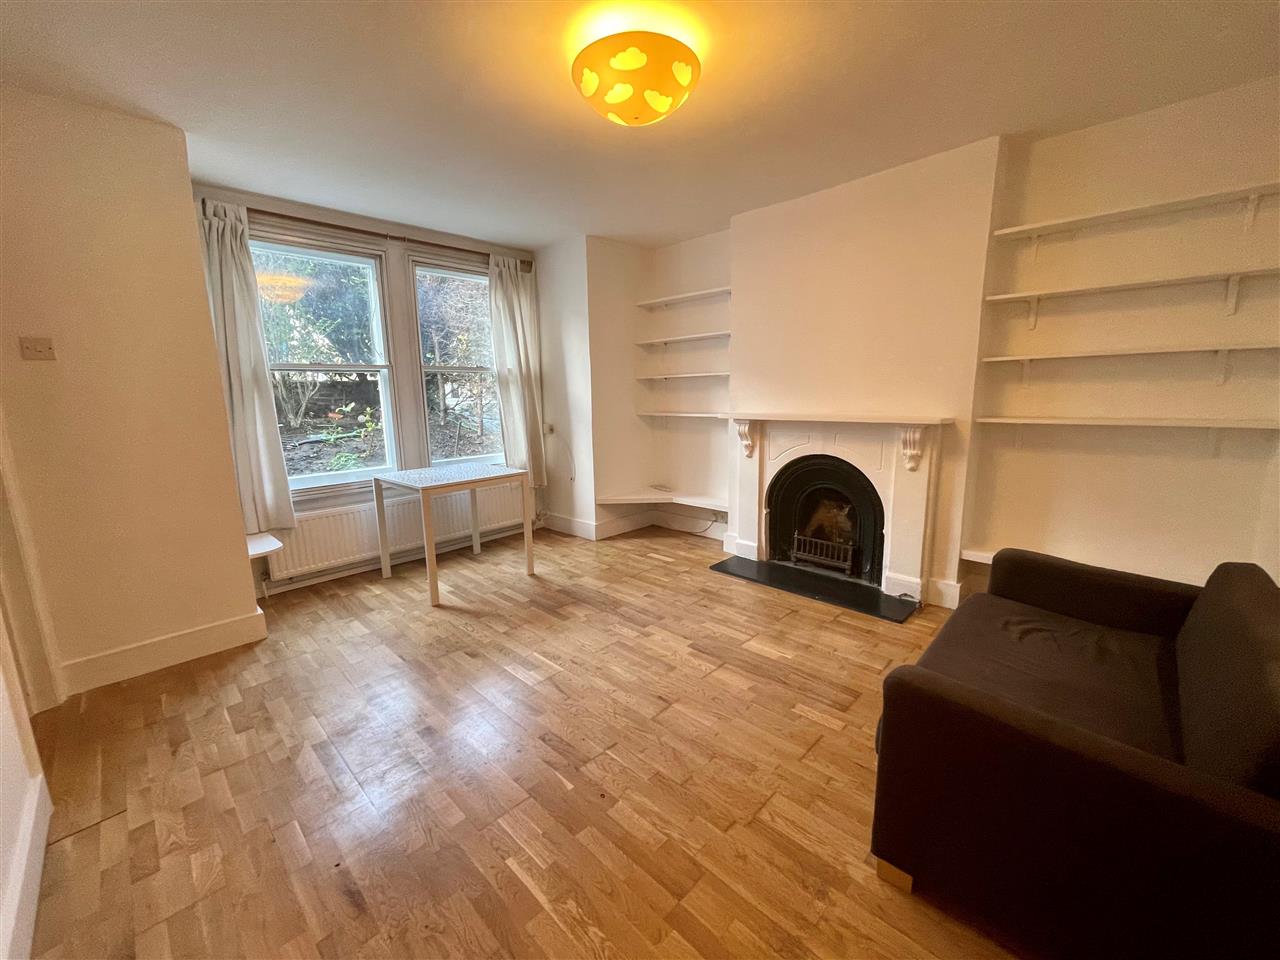 2 bed flat to rent in Tufnell Park Road - Property Image 1